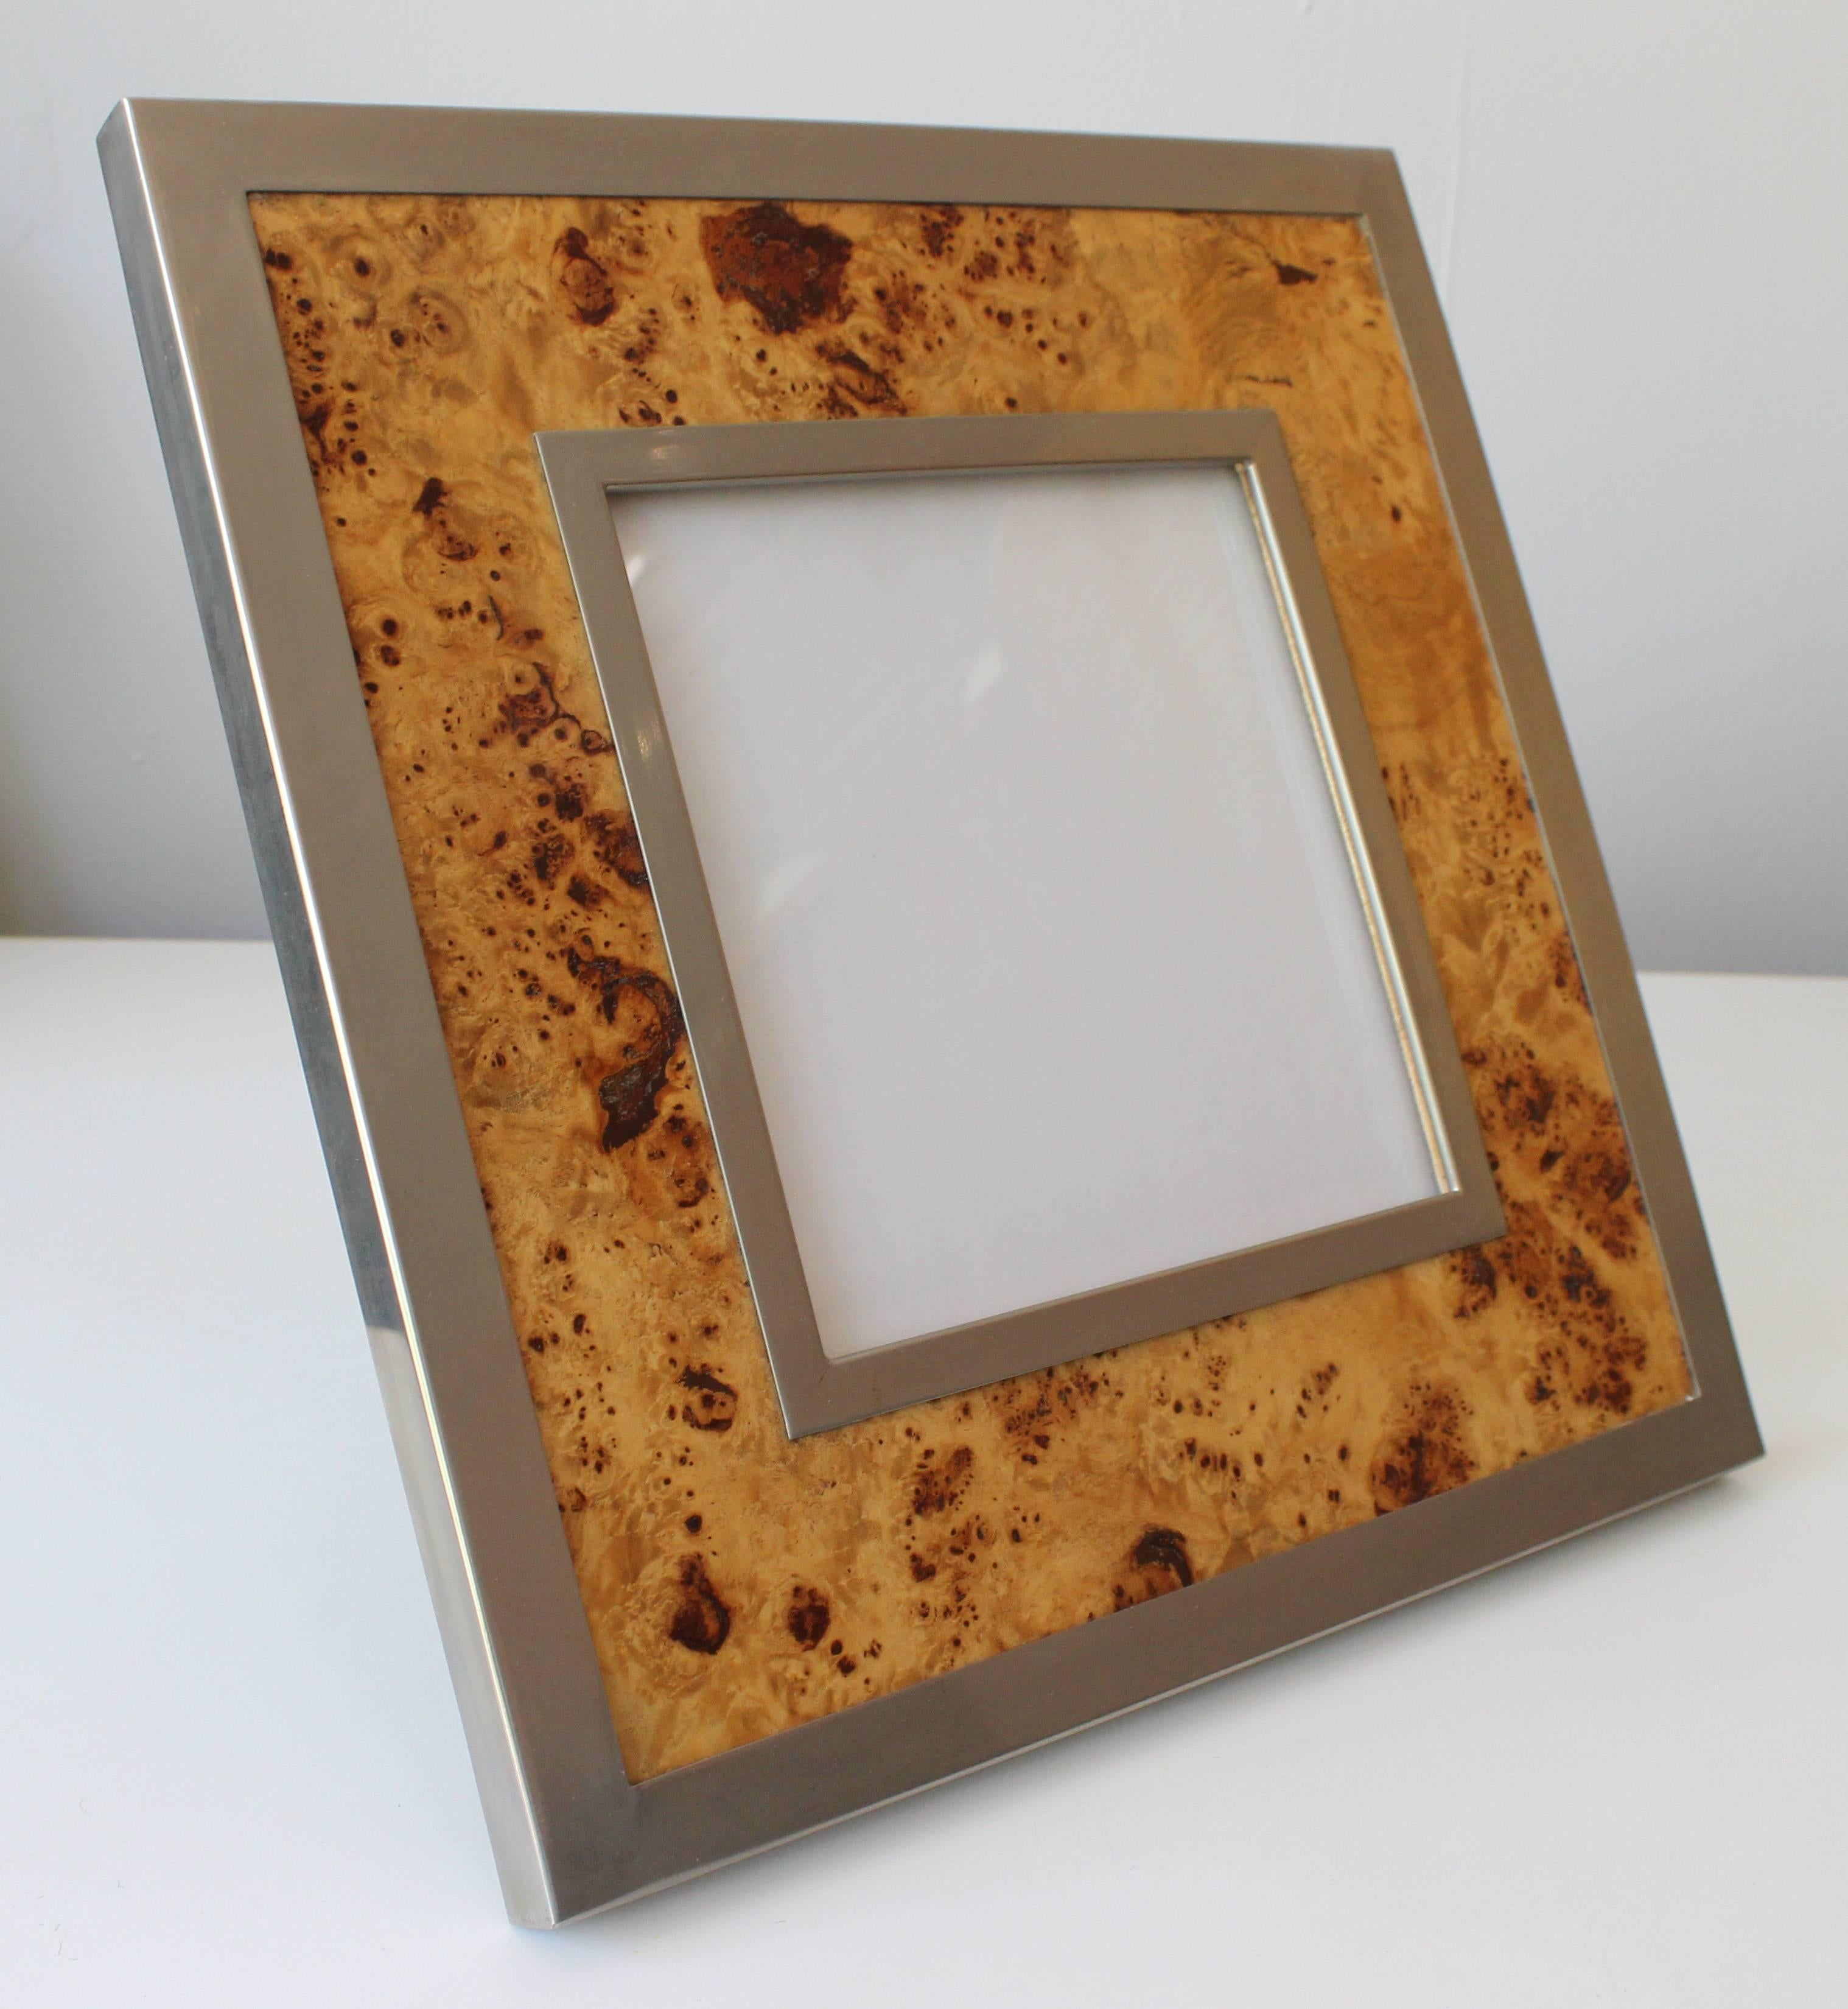 A brushed steel and burled olivewood picture frame designed by Willy Rizzo.
Two available.